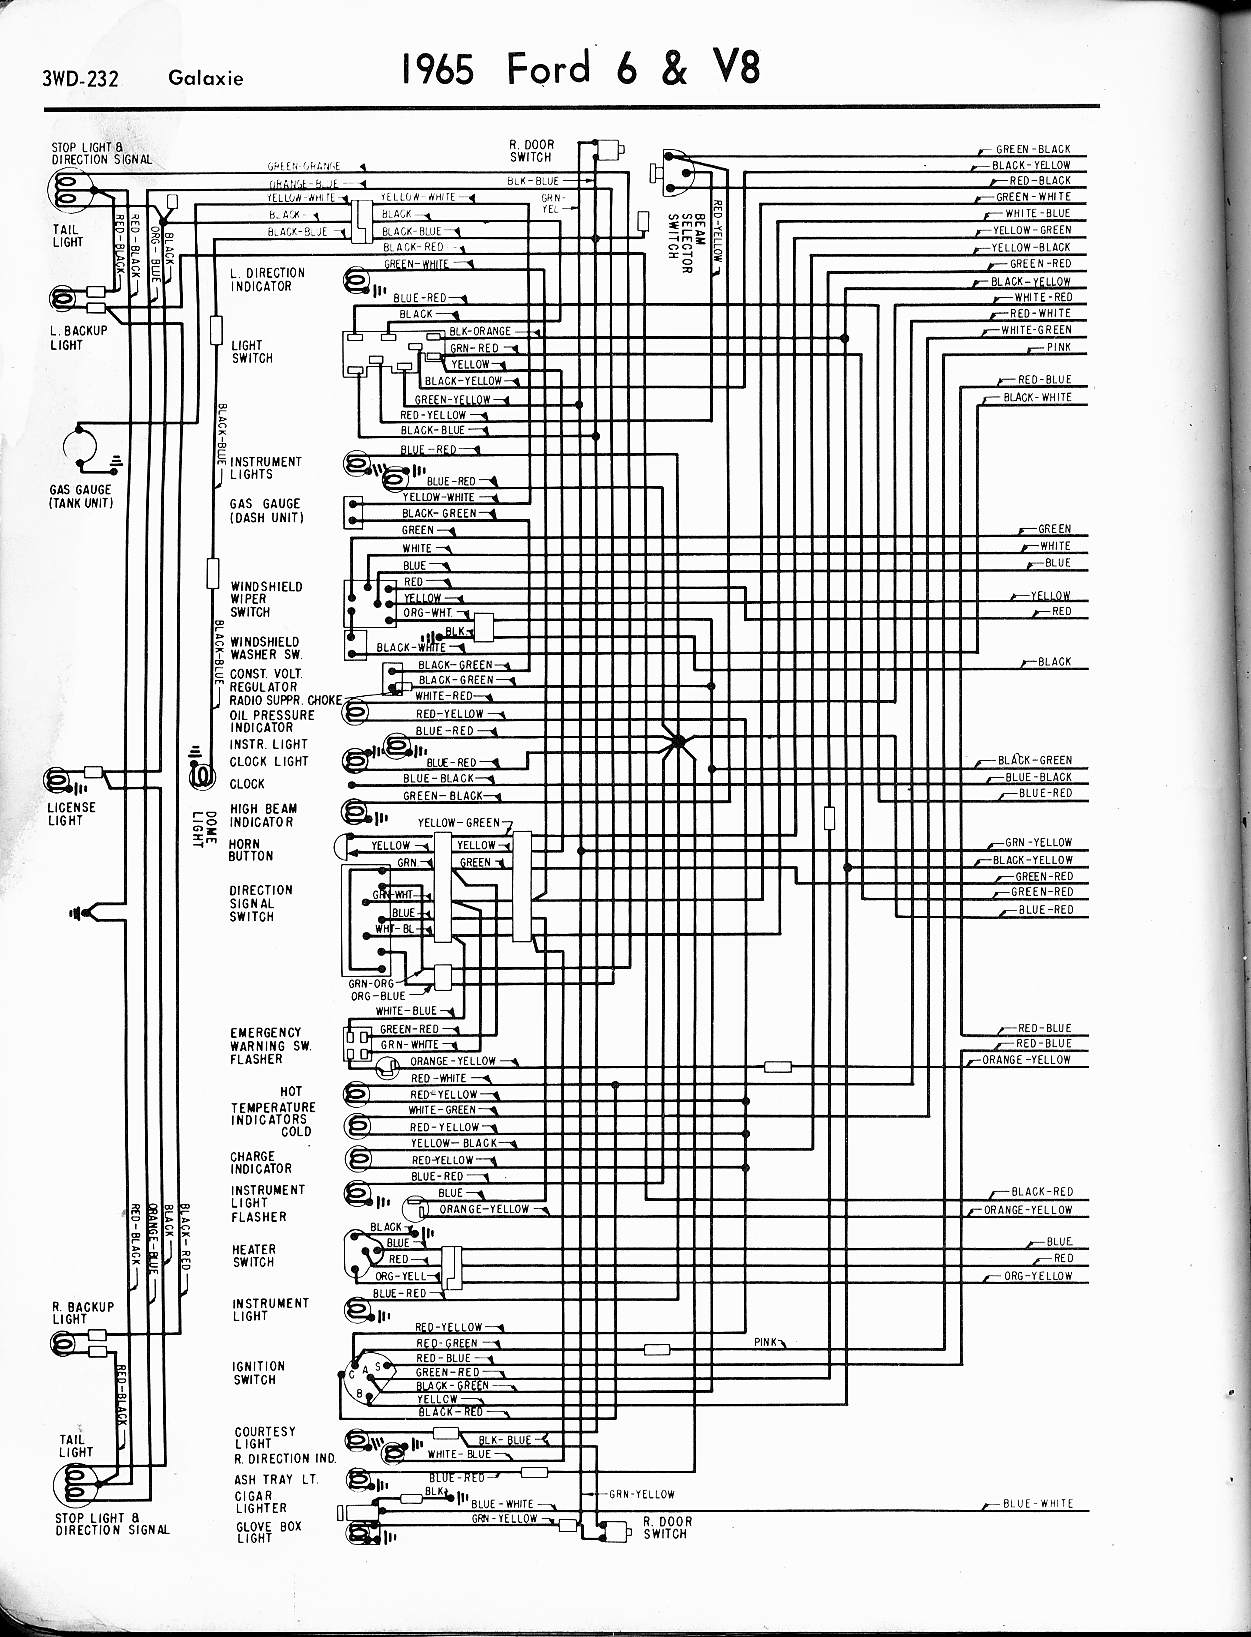 2000 Ford Ranger Fuel Gauge Wiring Diagram from www.oldcarmanualproject.com